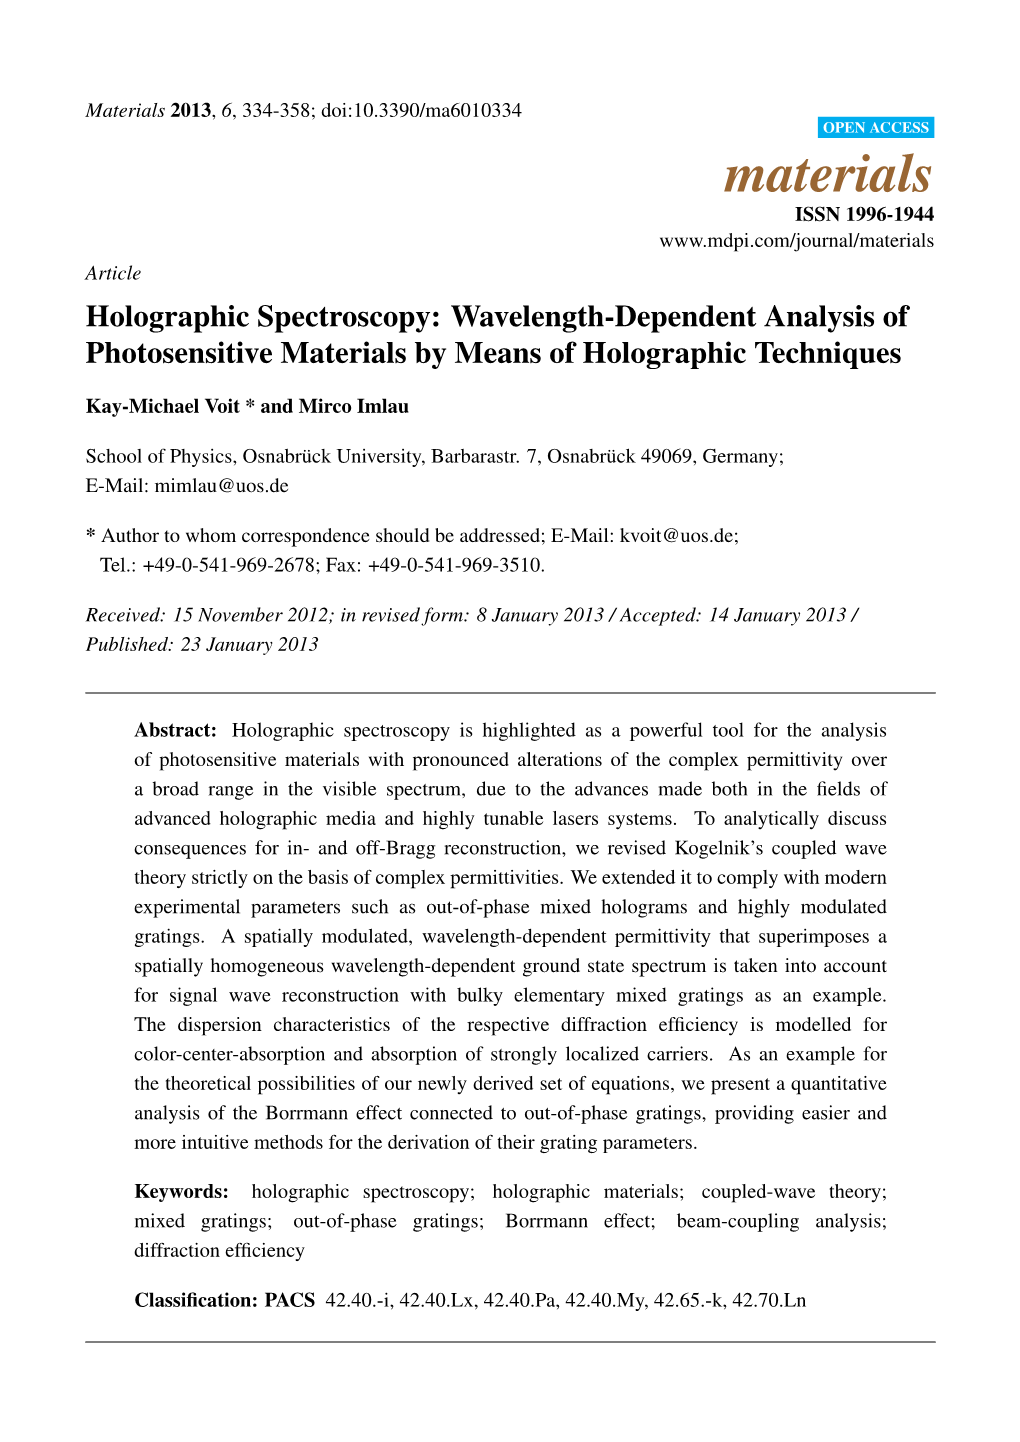 Holographic Spectroscopy: Wavelength-Dependent Analysis of Photosensitive Materials by Means of Holographic Techniques